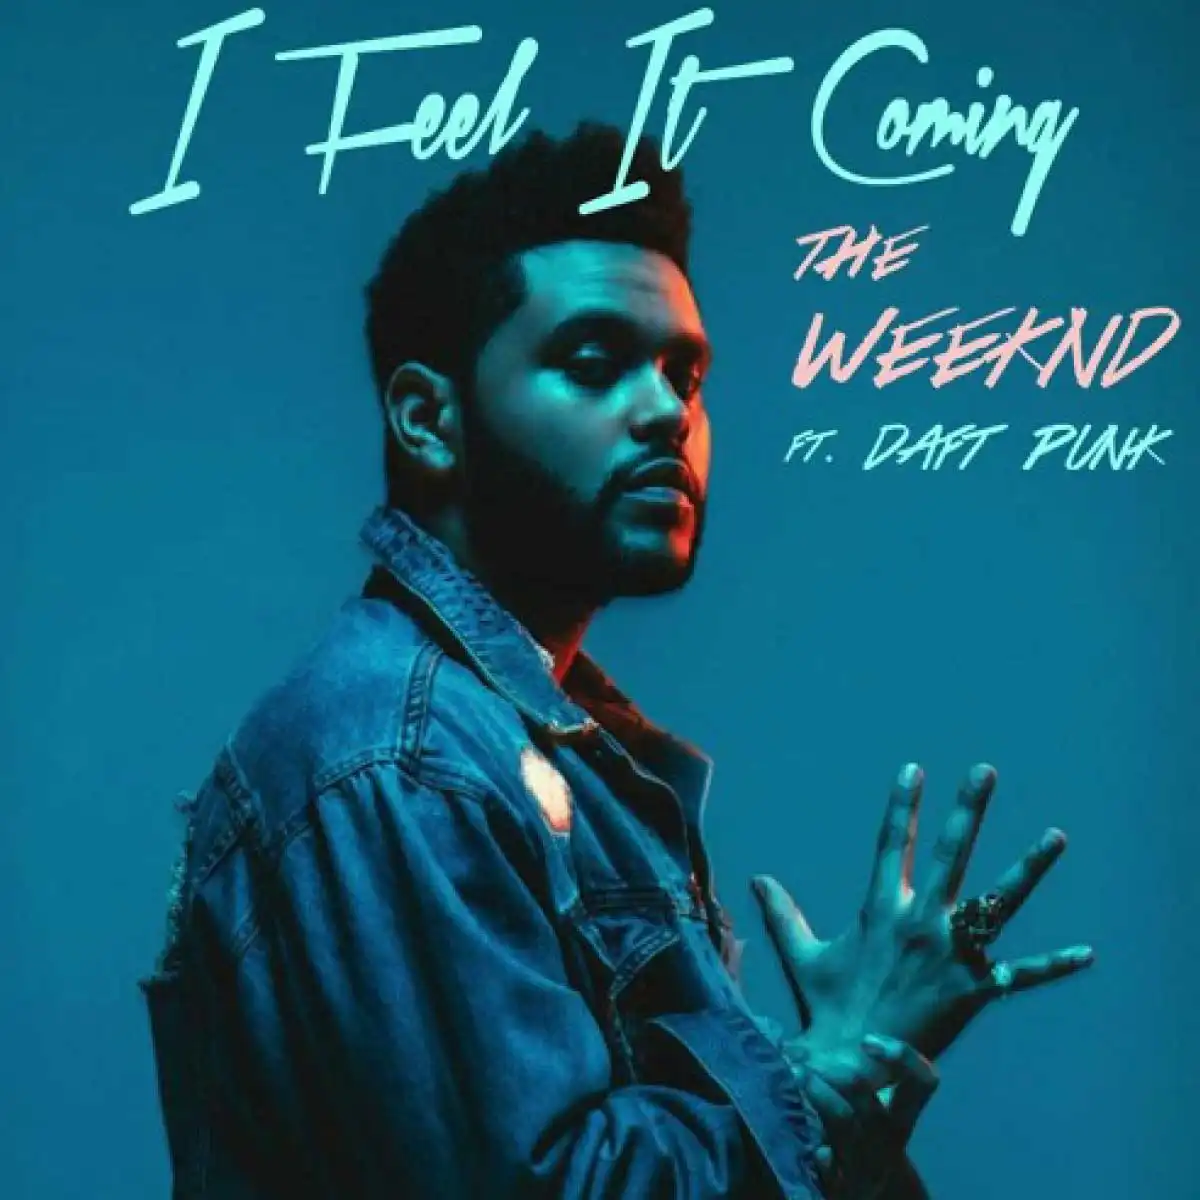 Feeling coming in the air. The Weeknd feat. I feel it coming the Weeknd. The Weeknd i feel it coming ft. Daft Punk. The Weeknd - Starboy ft. Daft Punk.